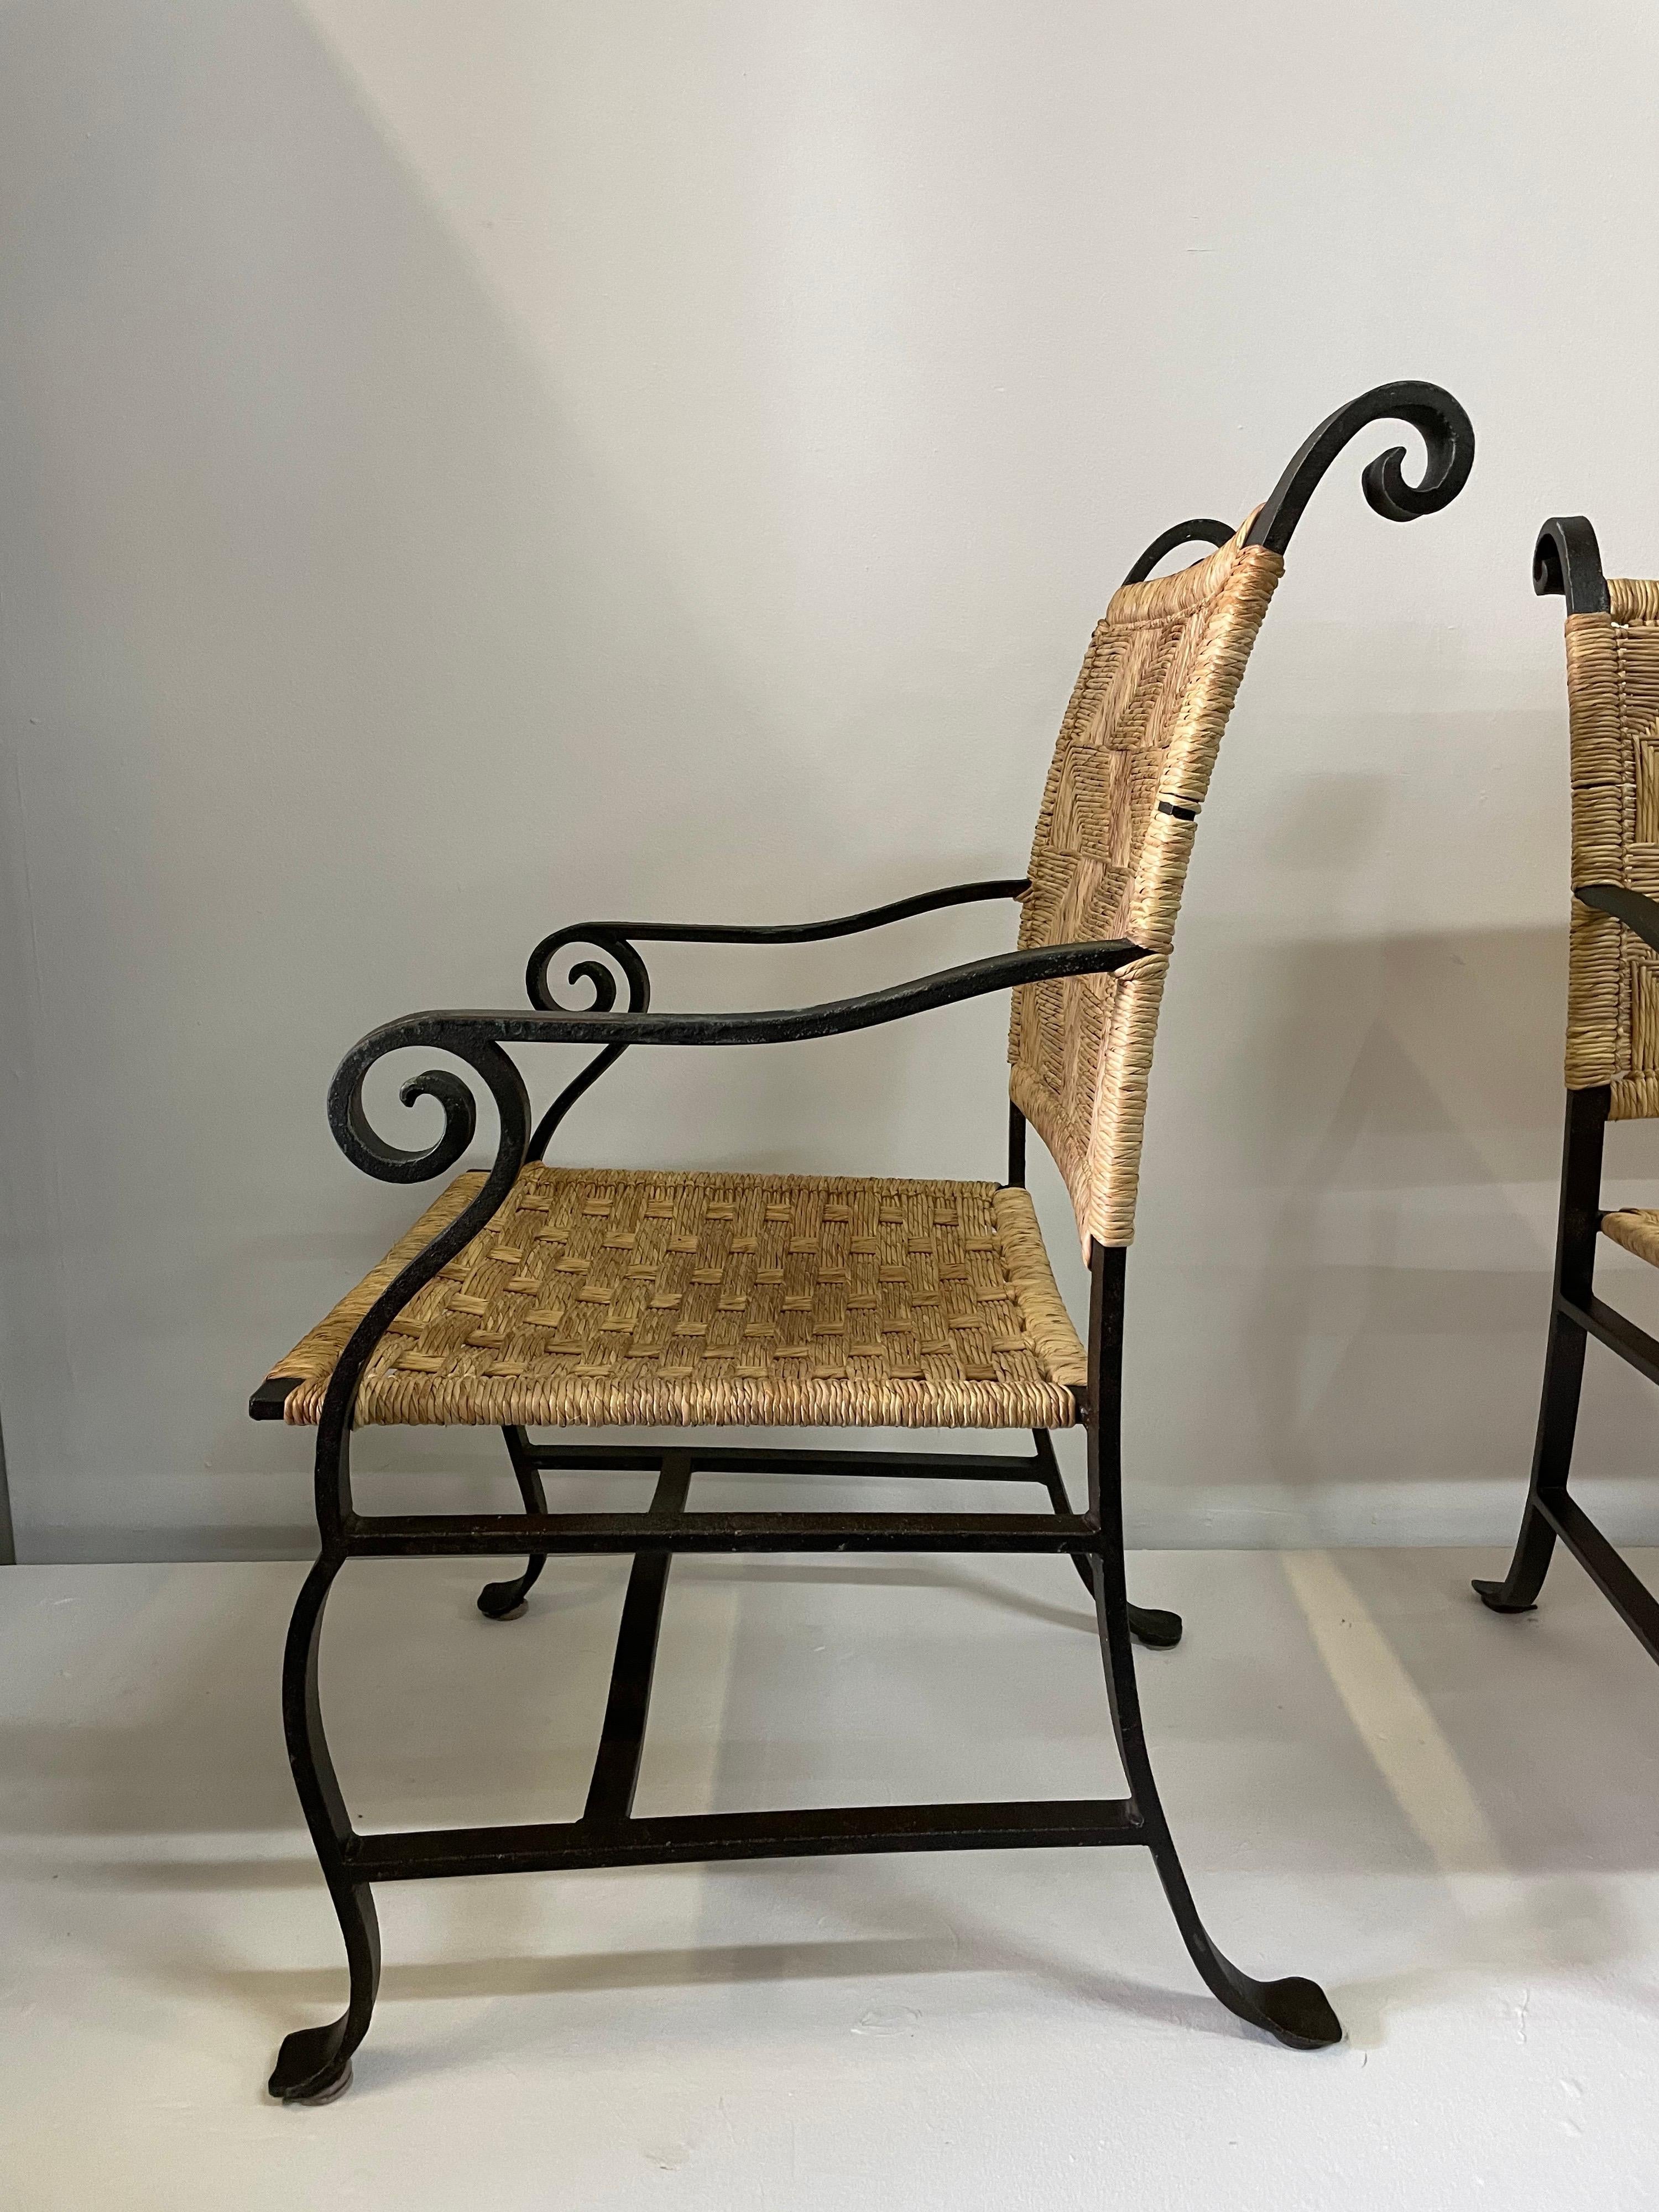 4 Hand Wrought Iron and Woven Raffia Armchairs In Good Condition For Sale In East Hampton, NY